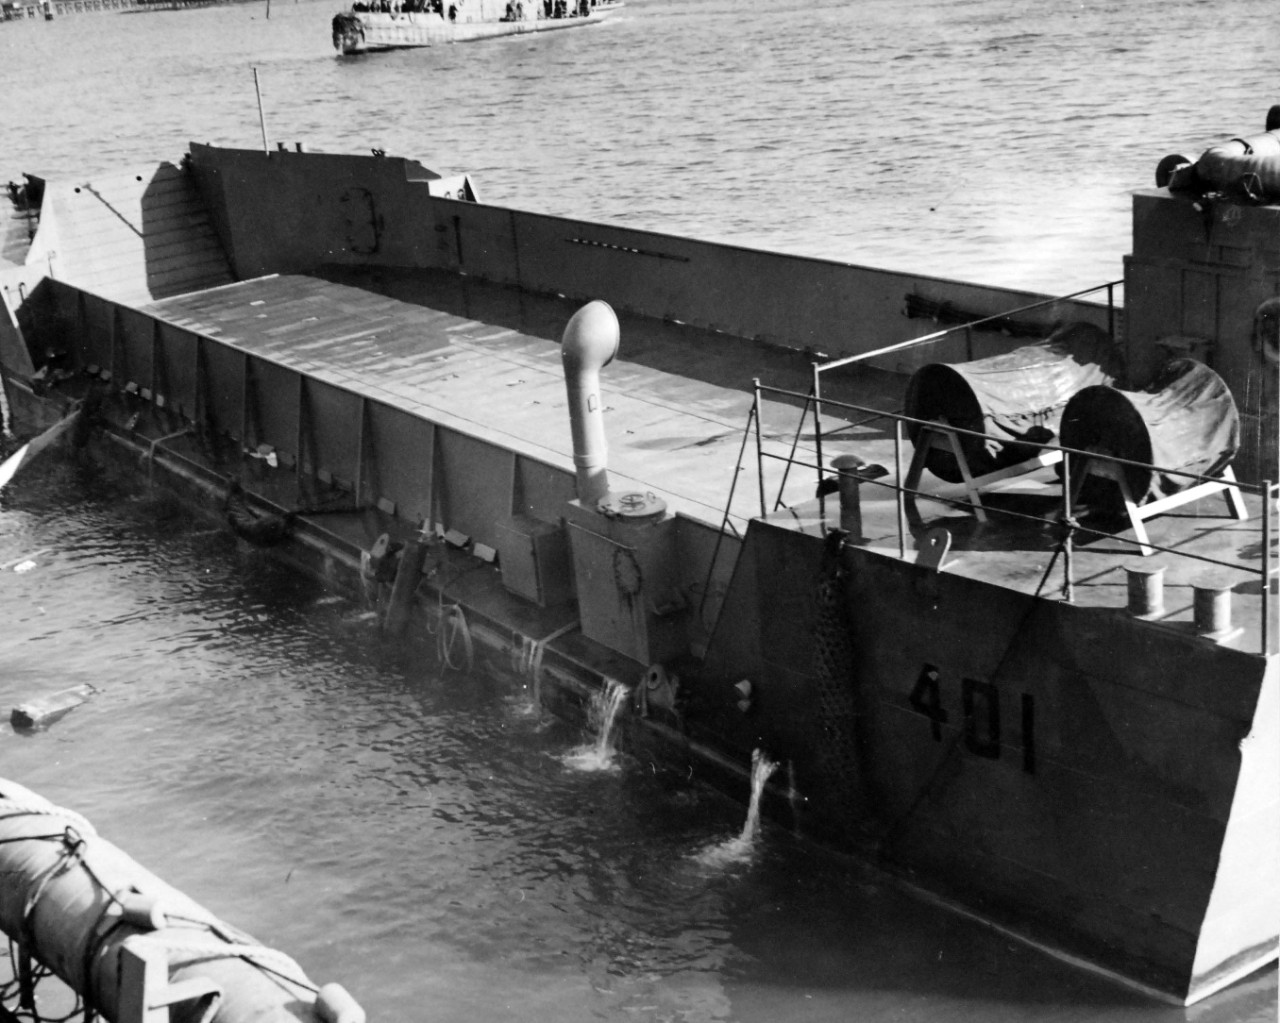 80-G-36269:  USS LST-383, December 1942.  Launching of an LCT-401 over the side of USS LST-383 at Norfolk, Virginia, December 3, 1942.  After launching.  Official U.S. Navy Photograph, now in the collections of the National Archives.  (2017/11/22).  